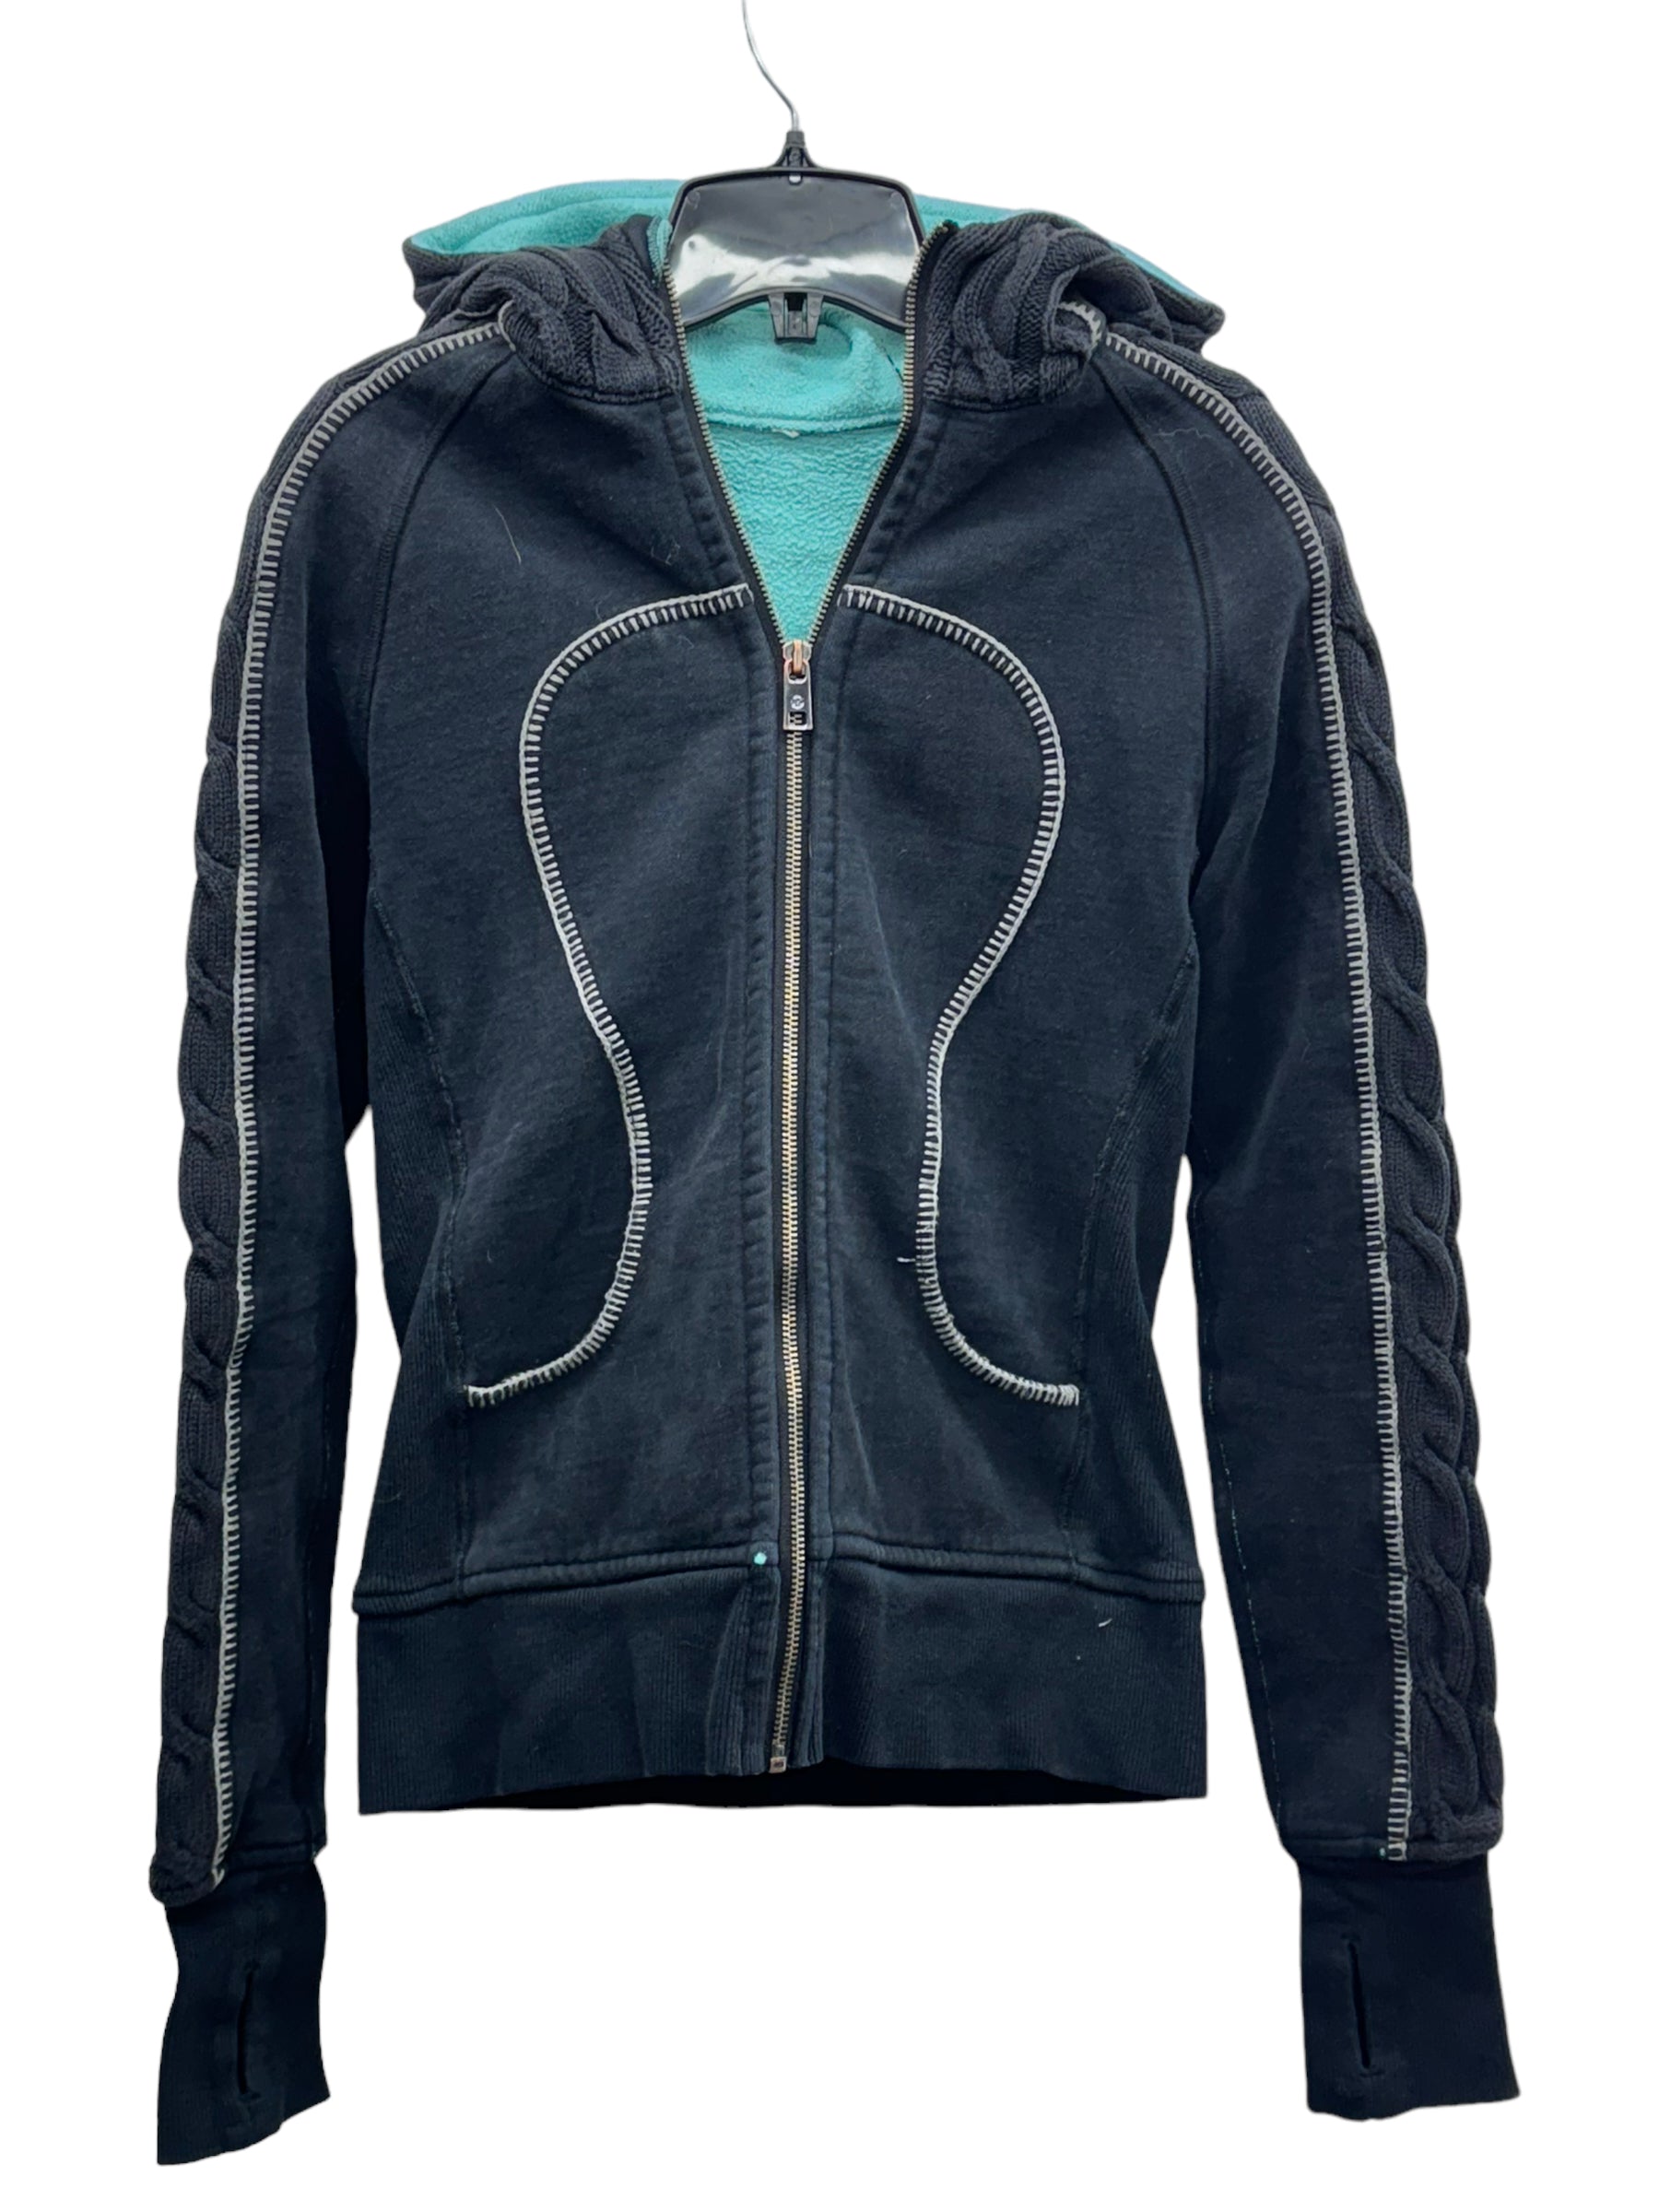 Lululemon Scuba hoodie turquoise and black knitted sleeves - 6 – PoppinTags